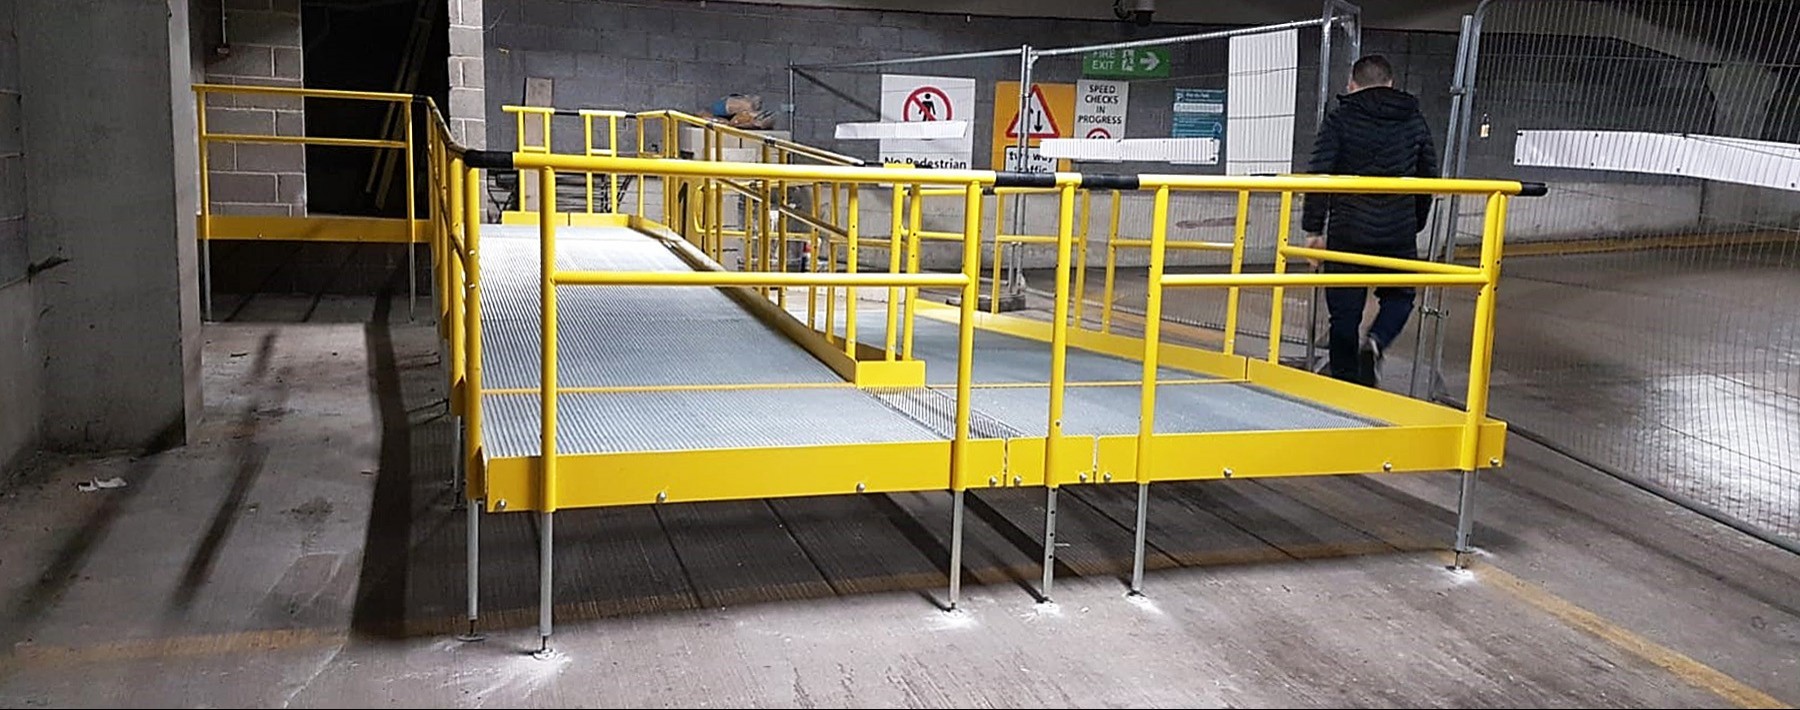 car park ramp completed photo